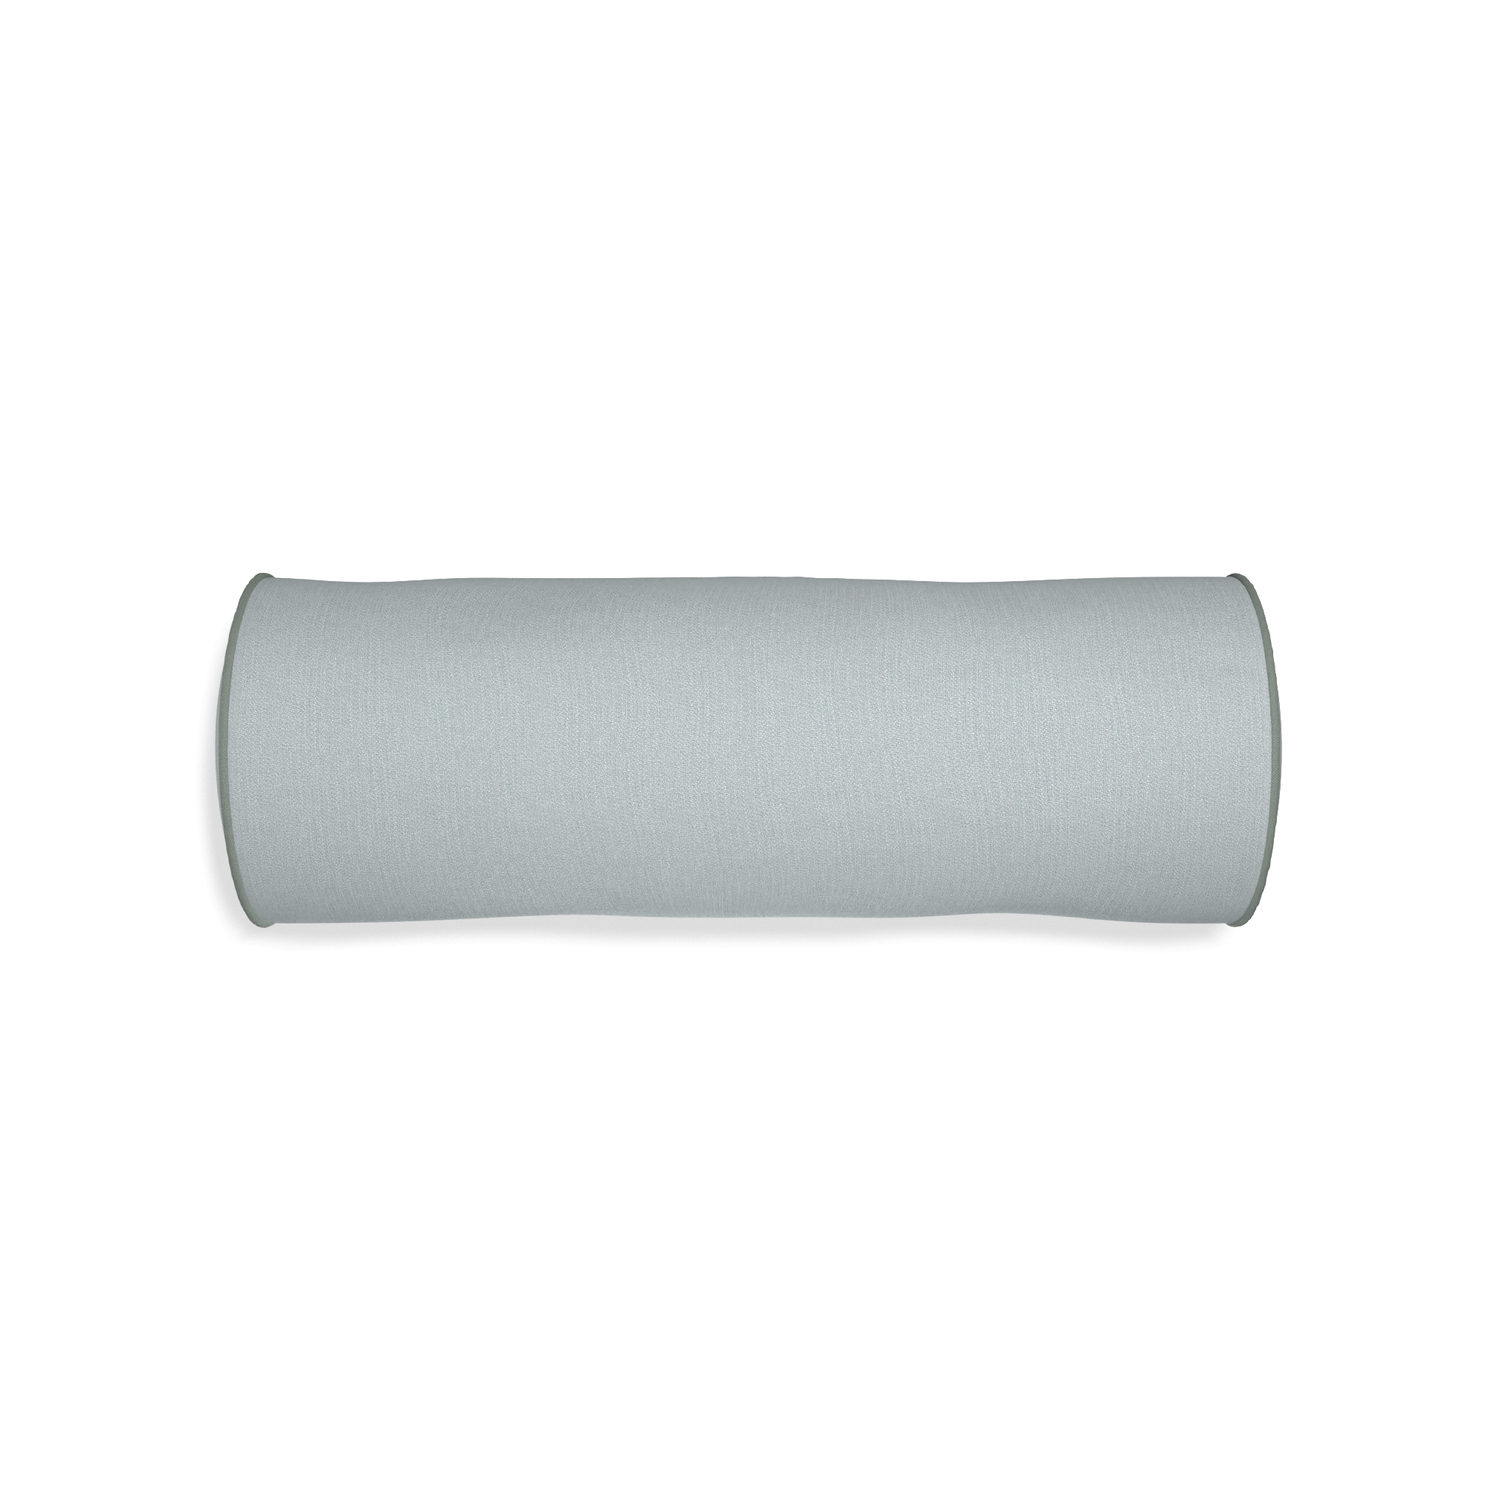 Bolster sea custom grey bluepillow with sage piping on white background